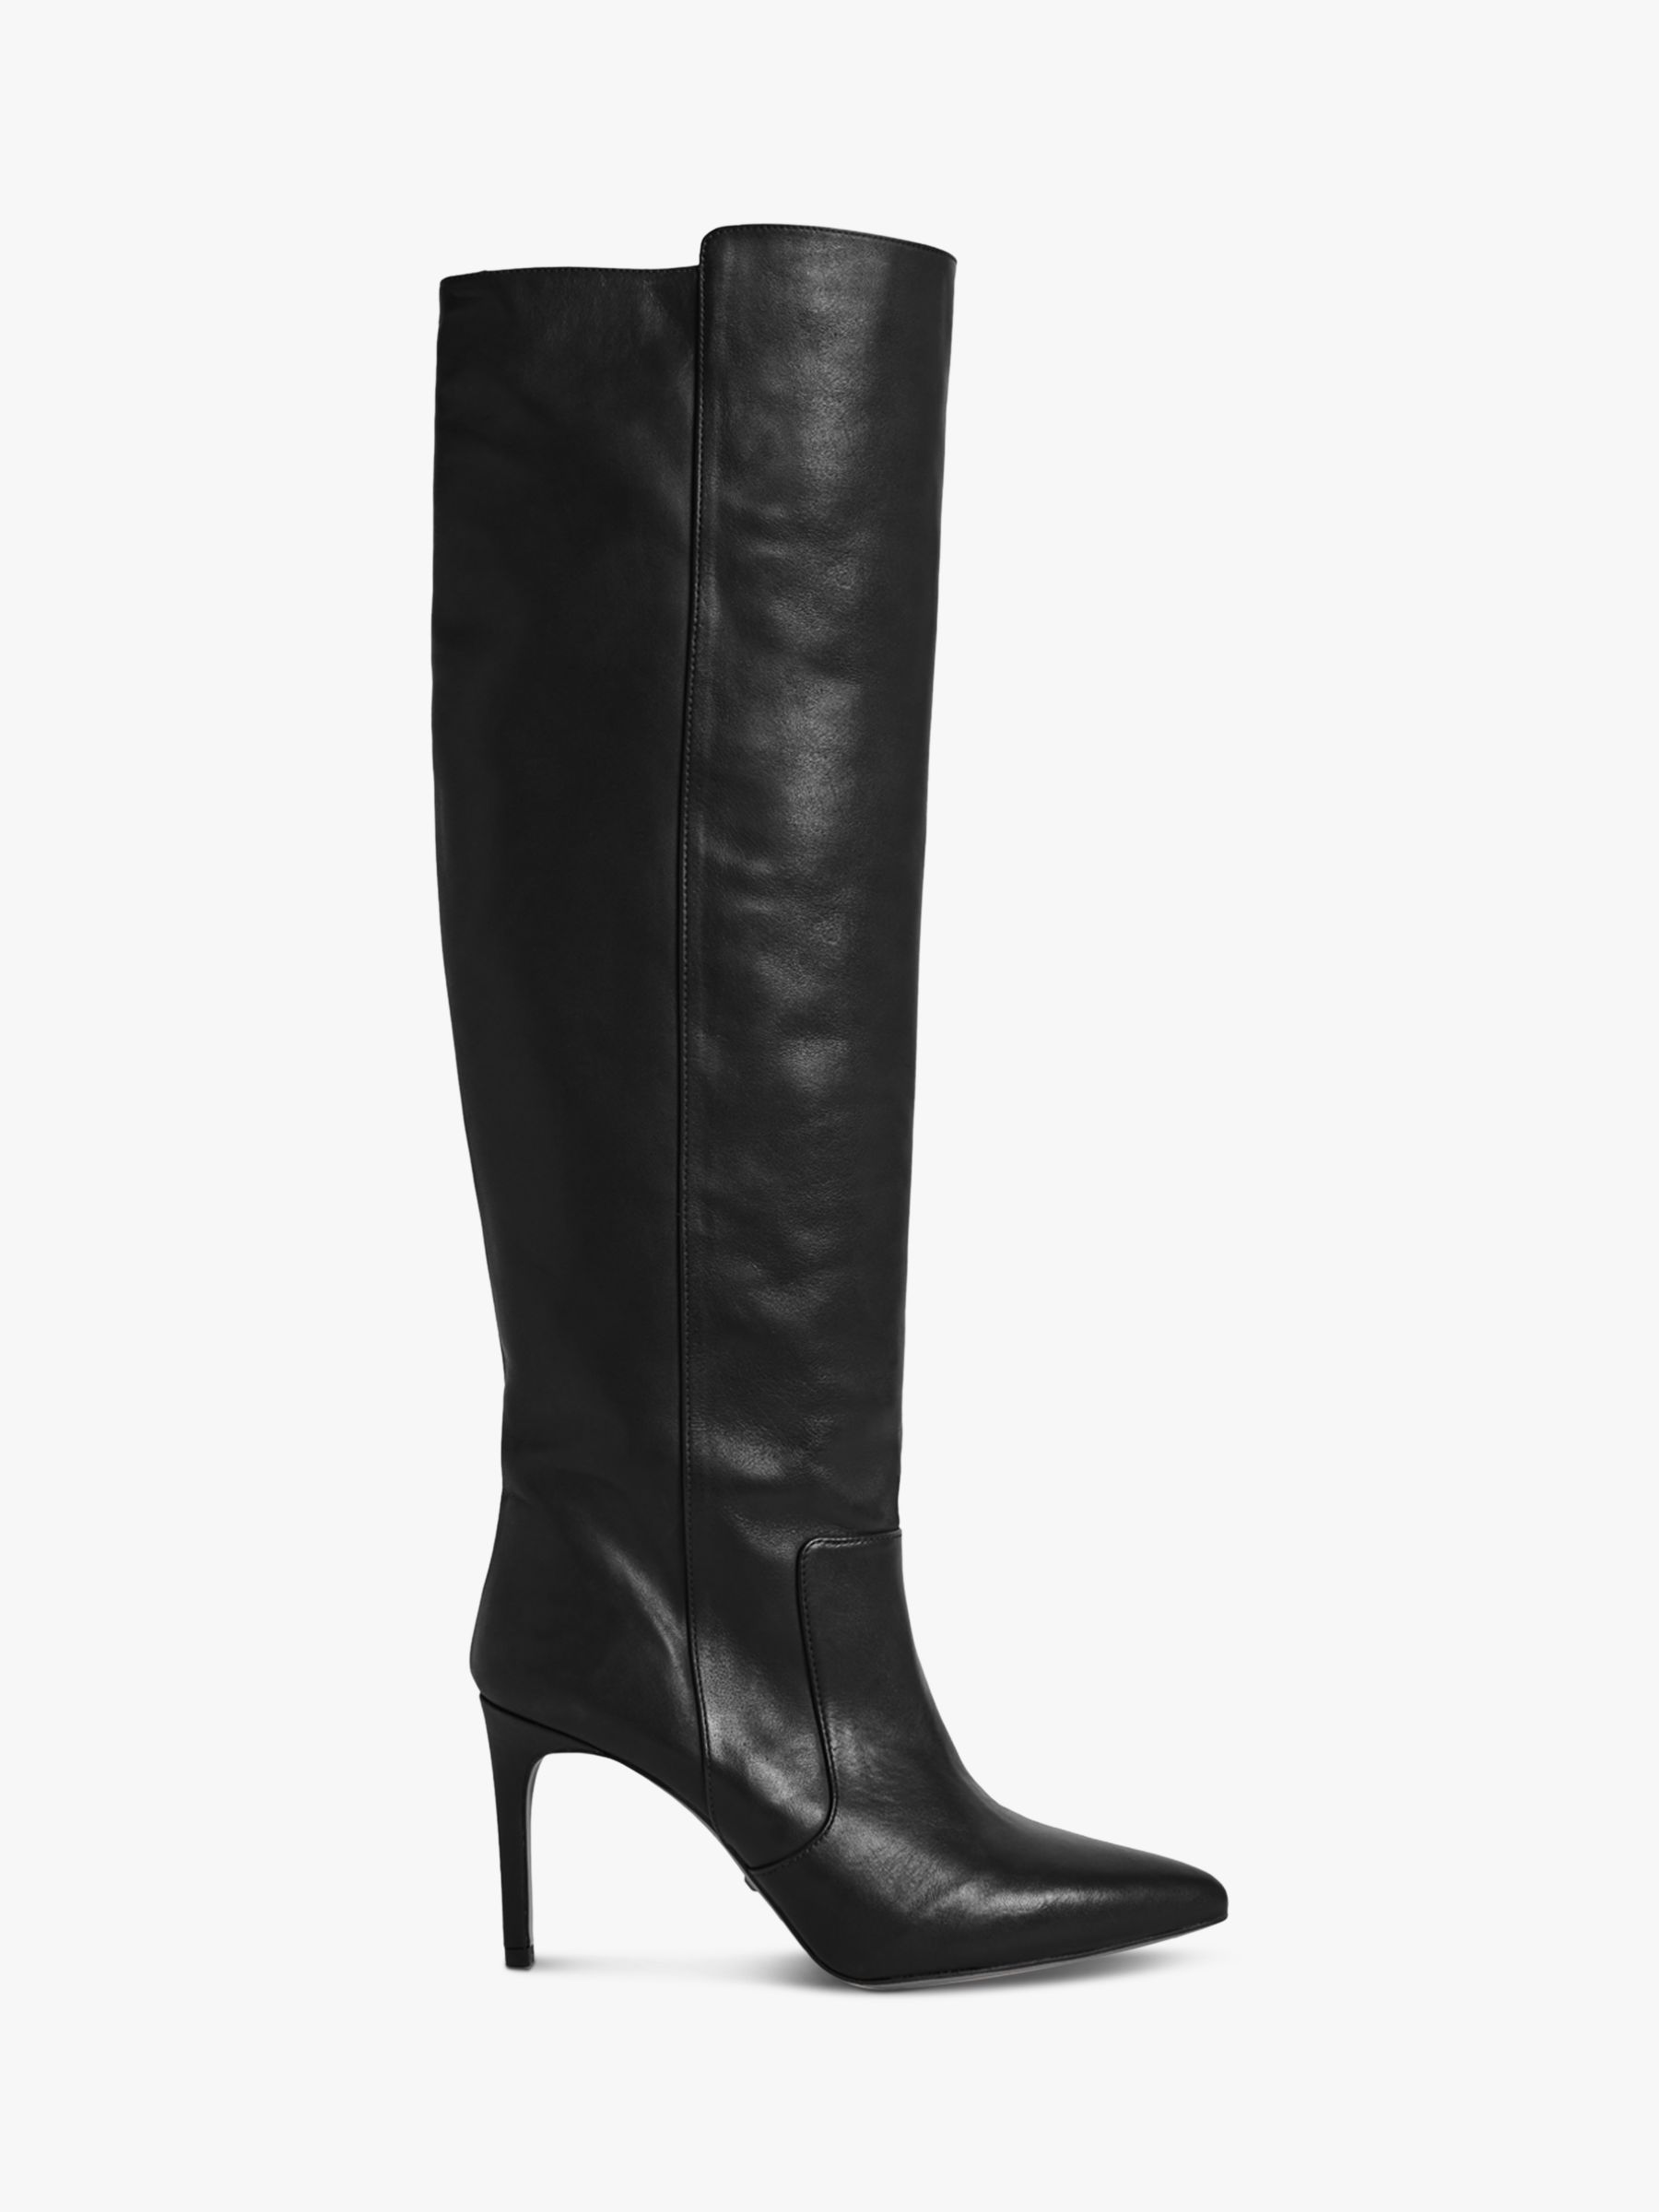 Reiss Zinnia Leather Pointed Toe Knee High Boots, Black at John Lewis ...